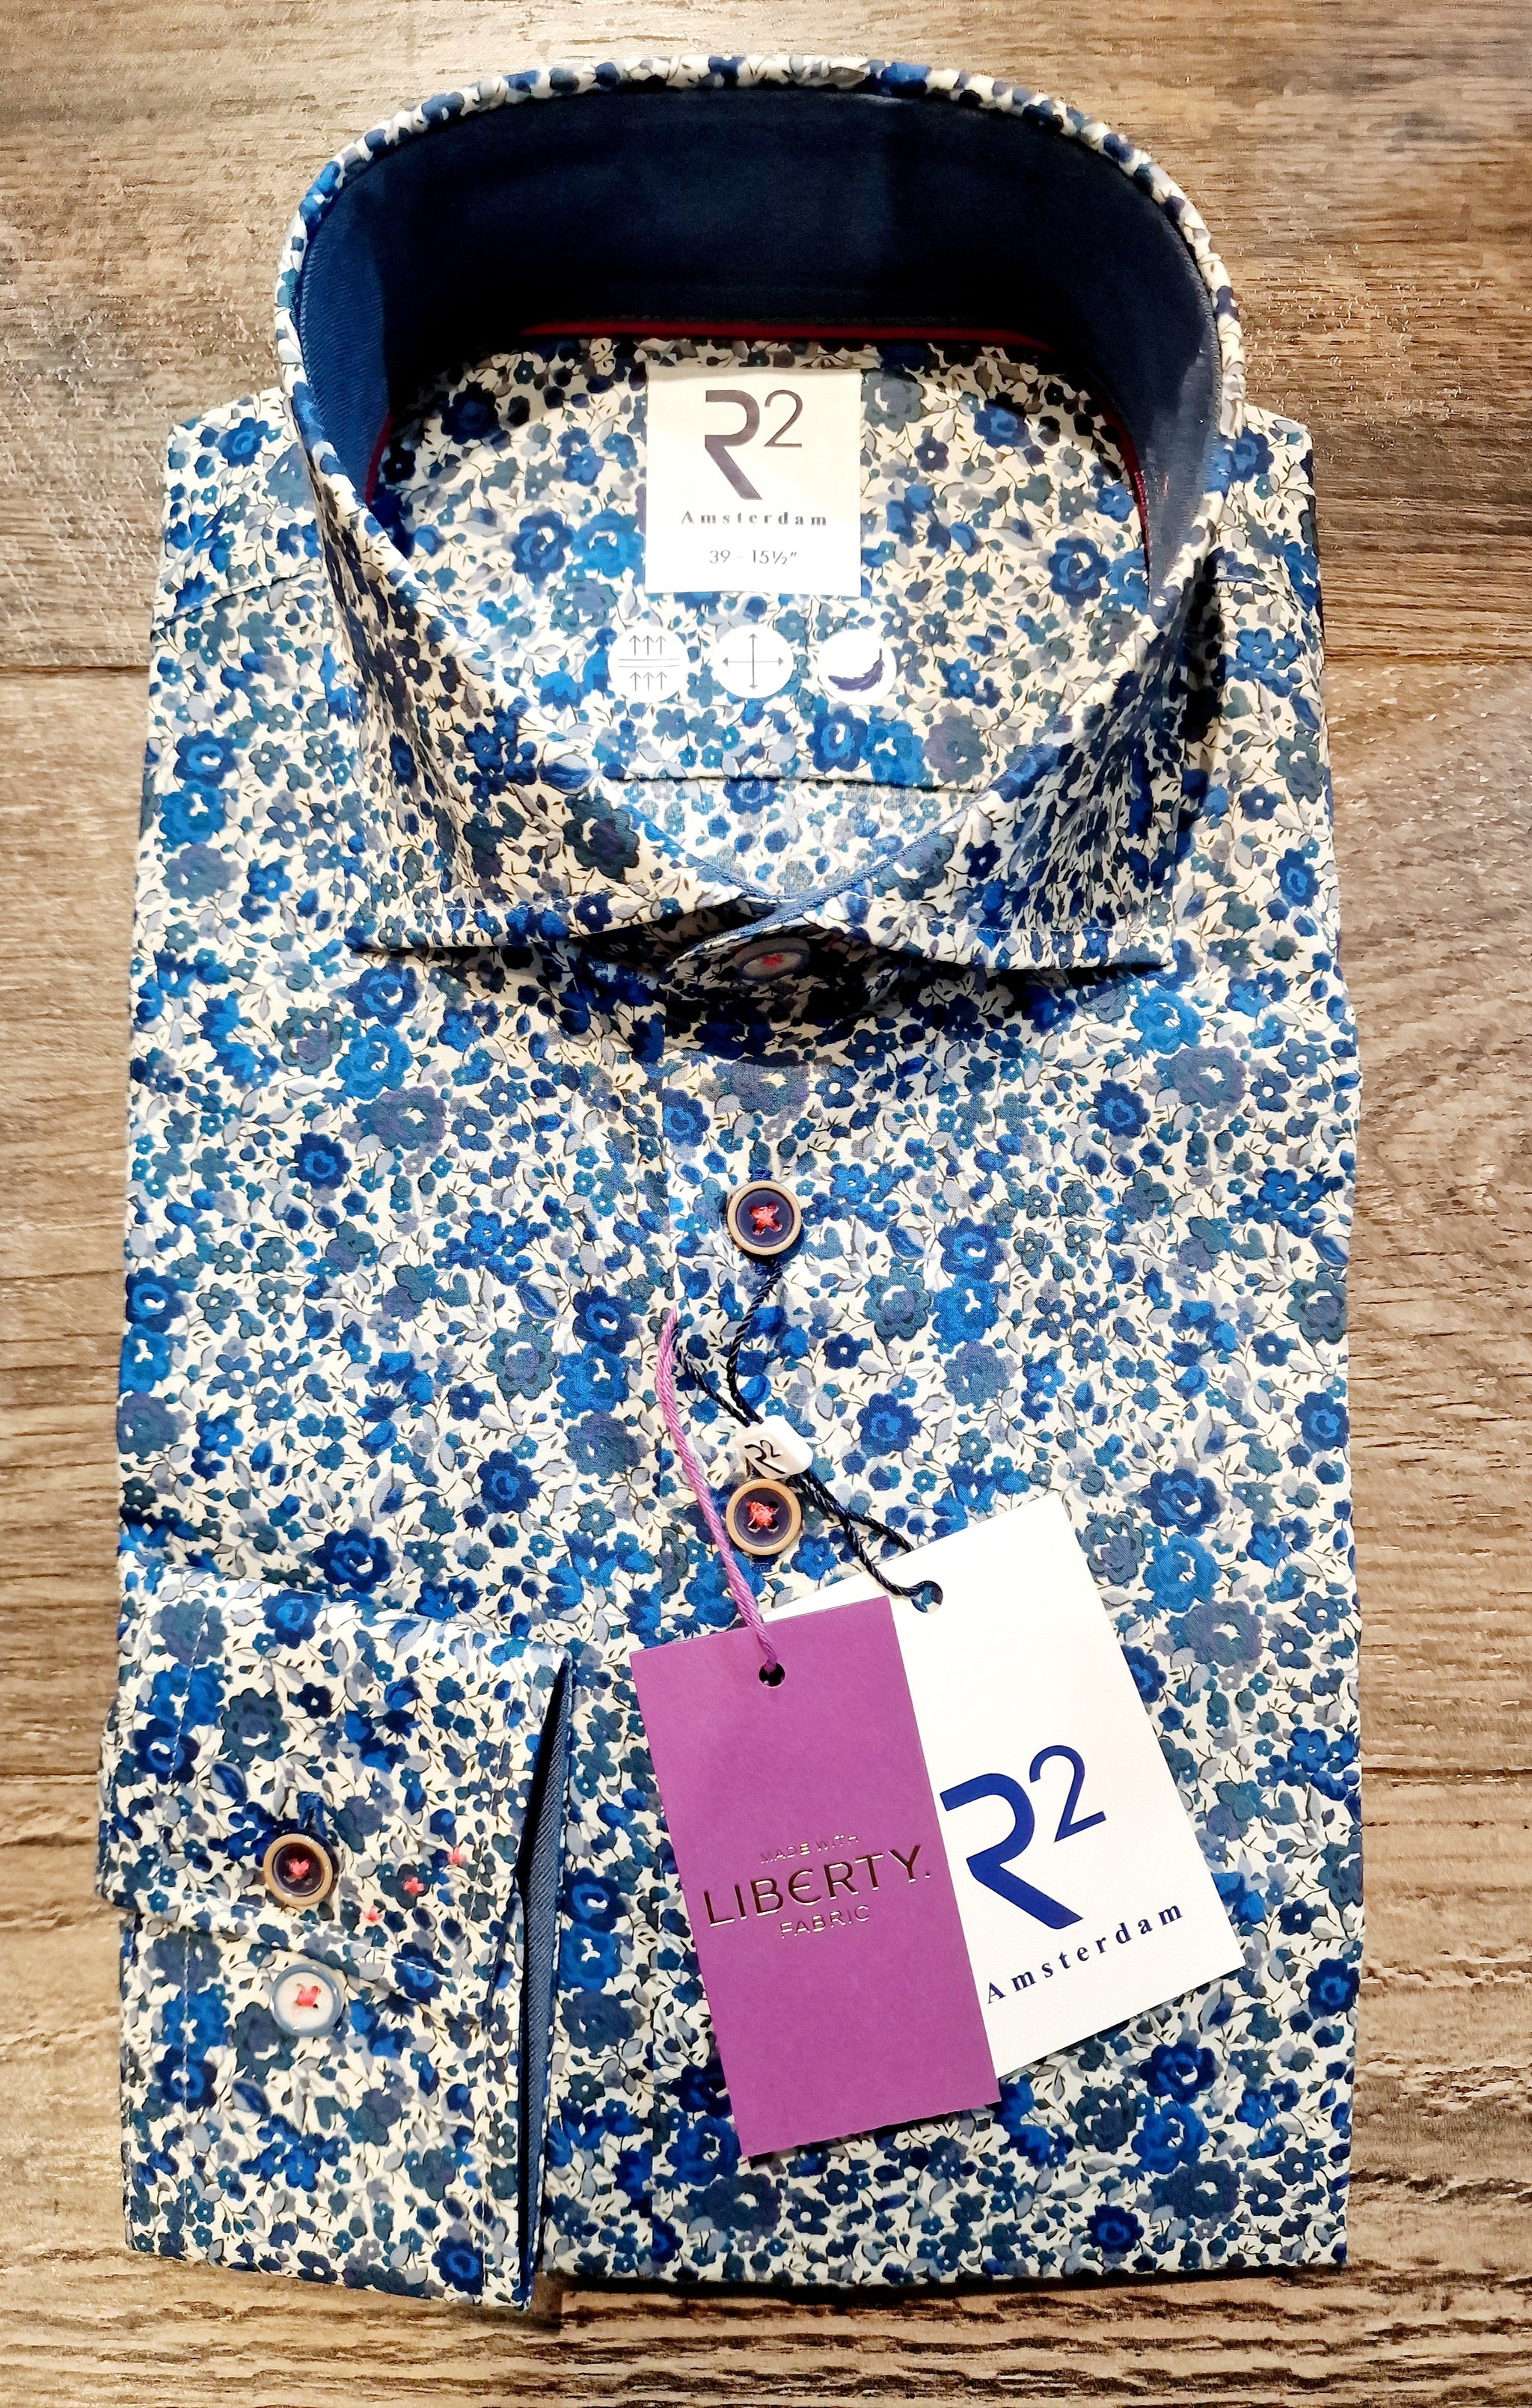 R2 - Amsterdam shirt made with Liberty Lawn Fabric